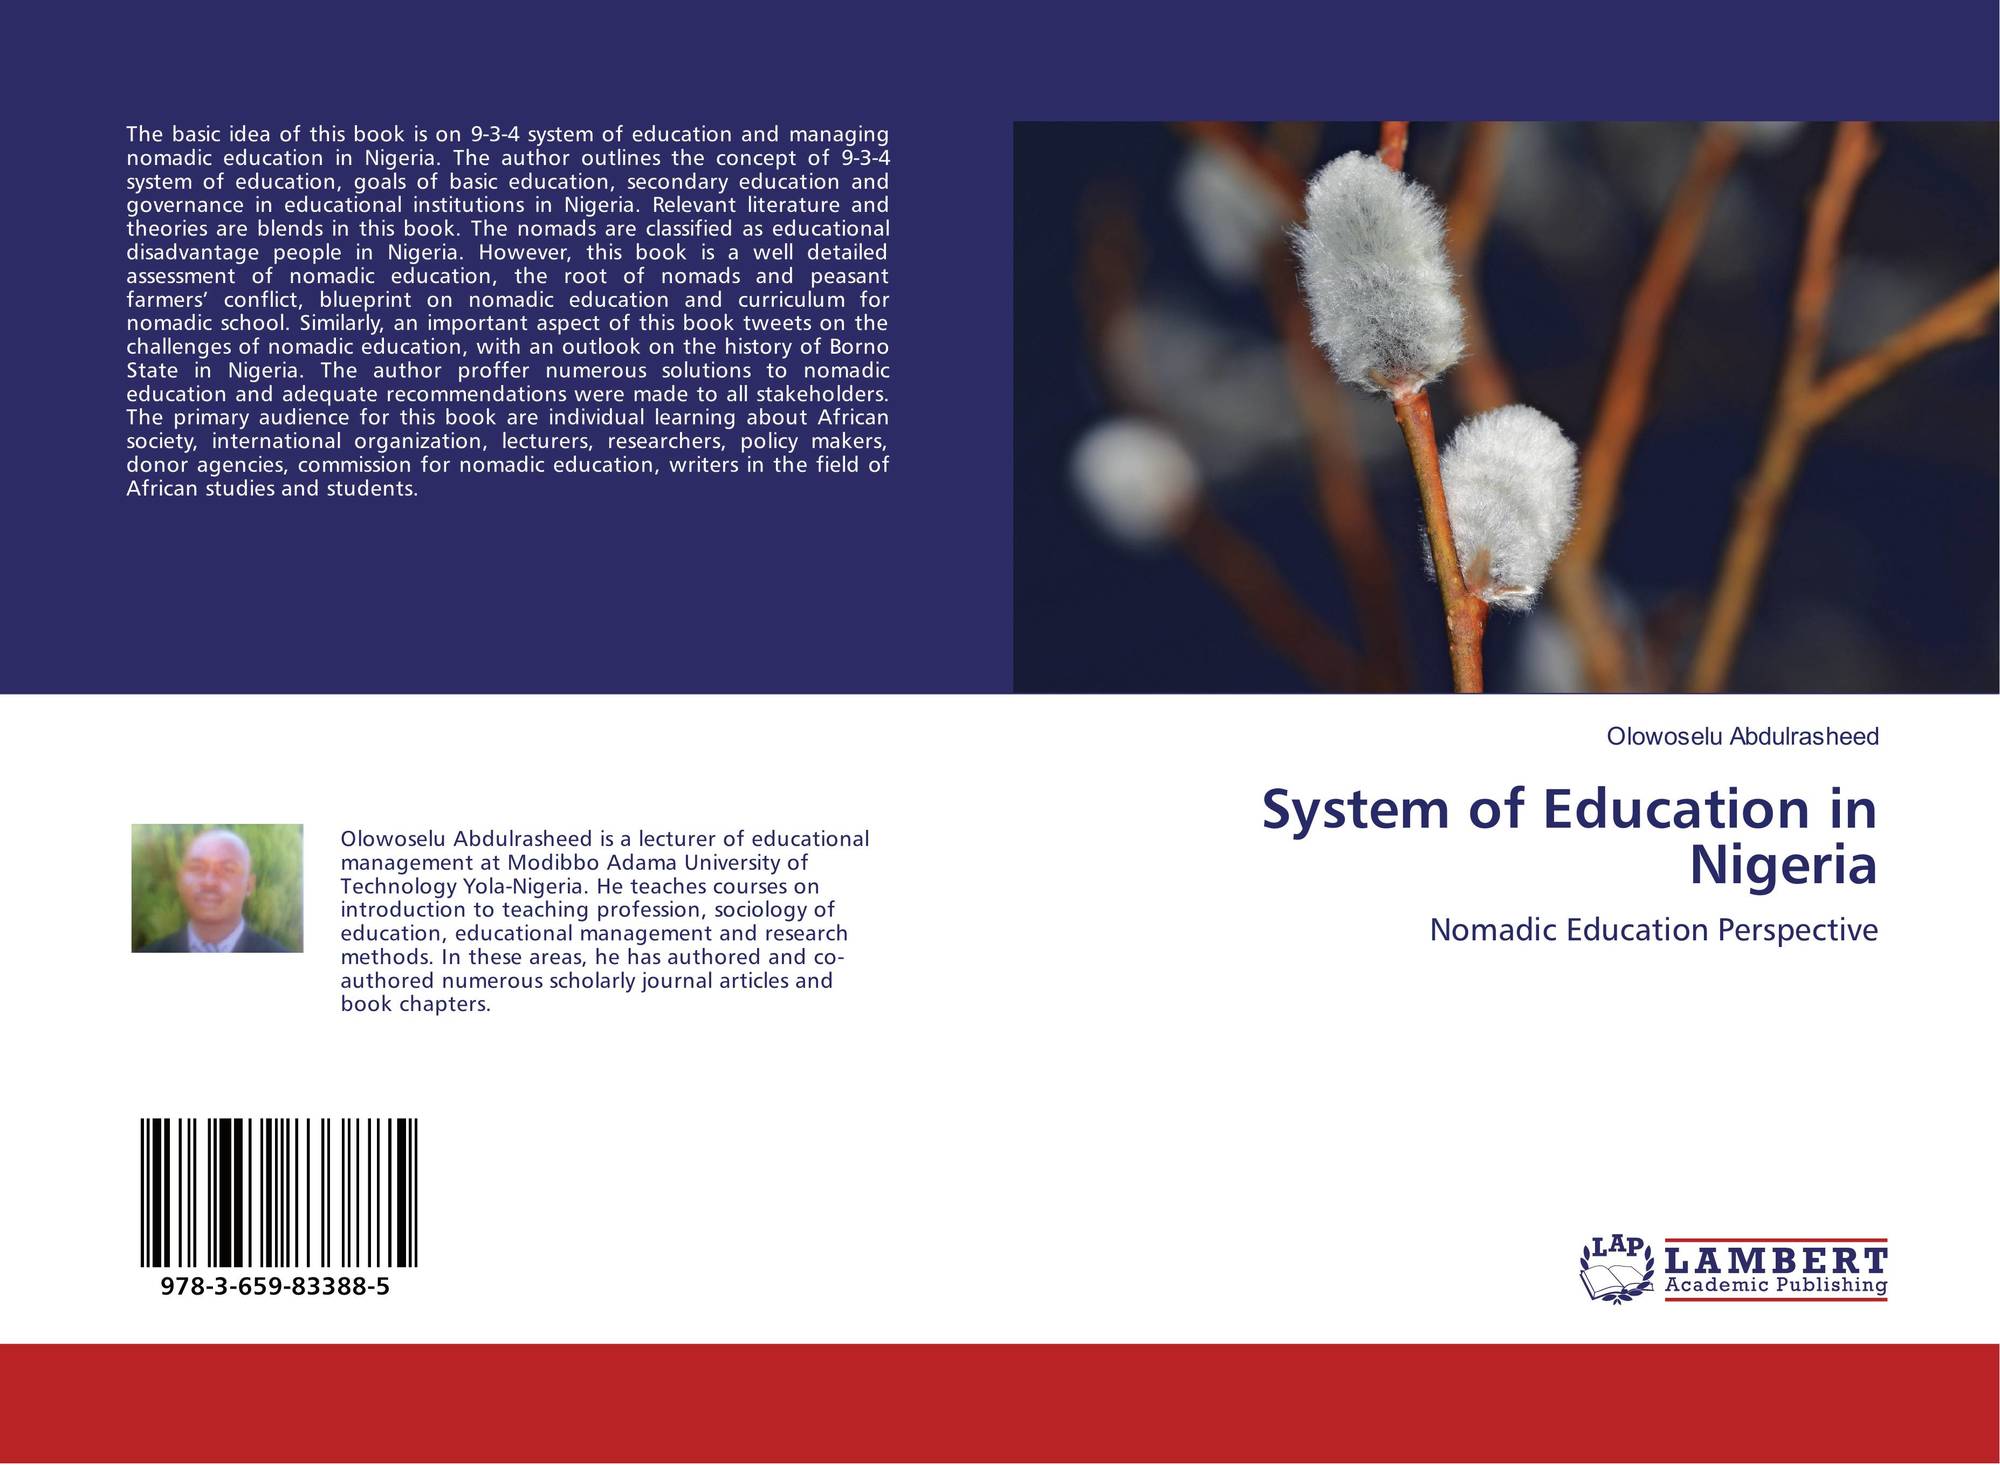 introduction of 9 3 4 system of education in nigeria